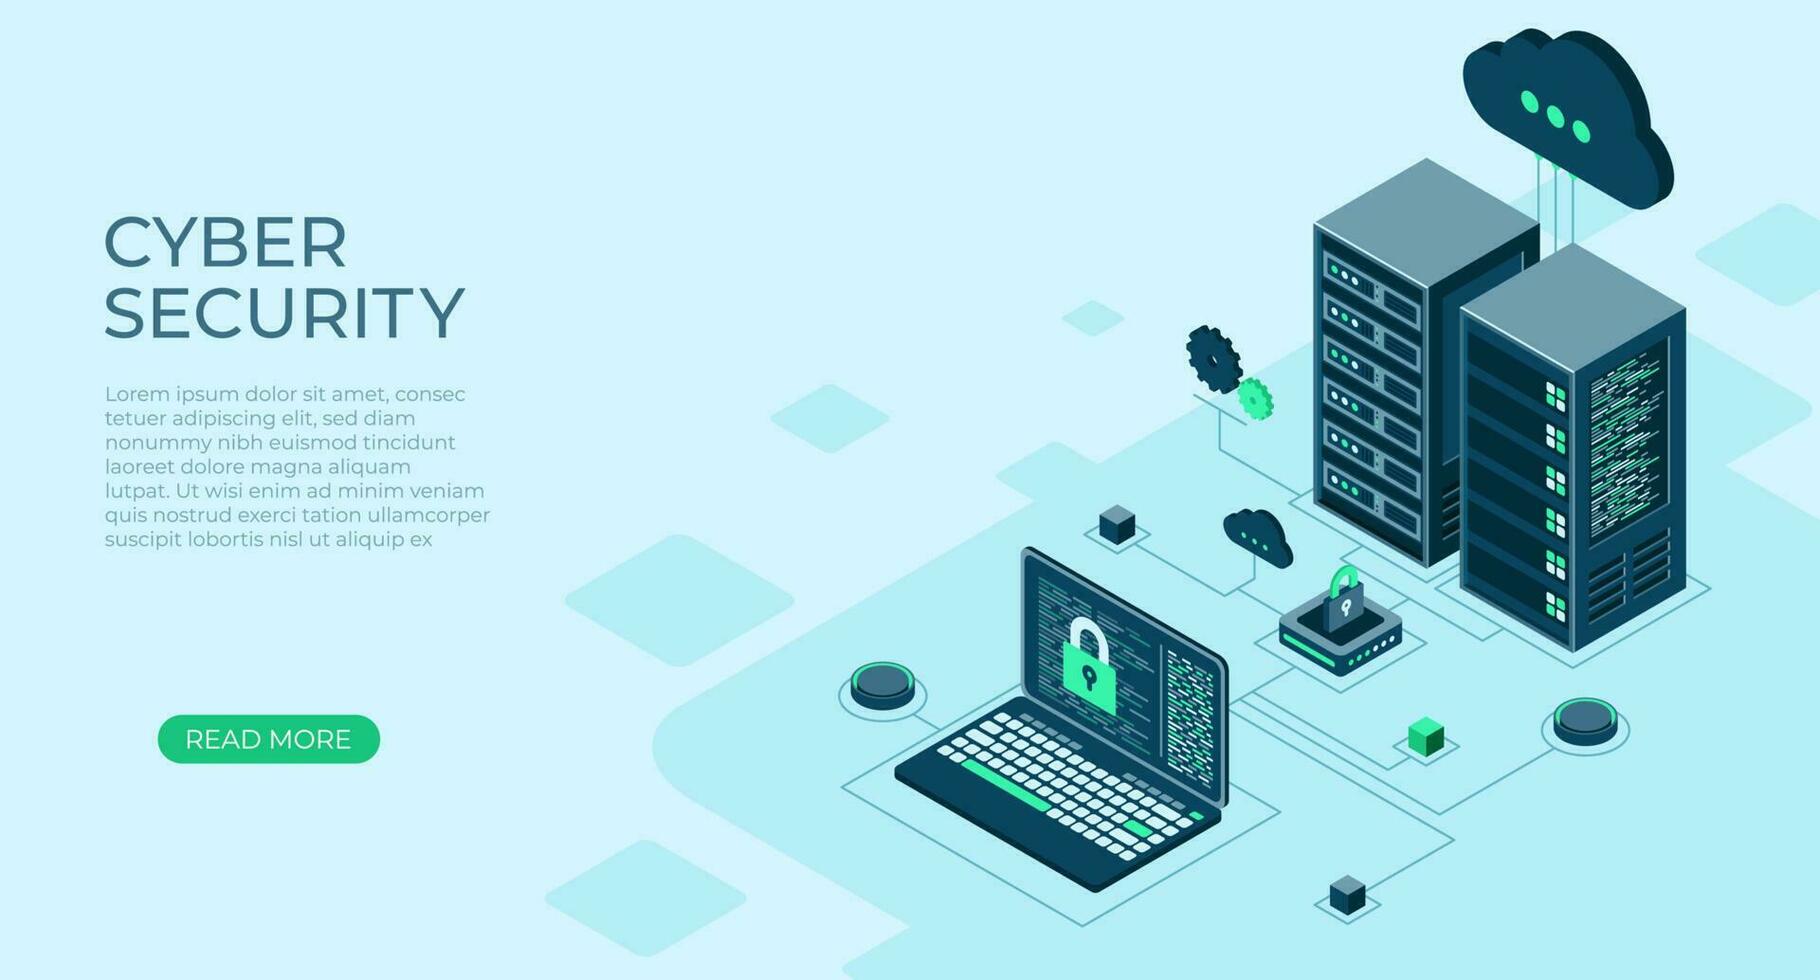 Cyber data security. Internet security isometric concept. Server room connected with laptop through protected hub. Online server protection system concept. Vector illustration